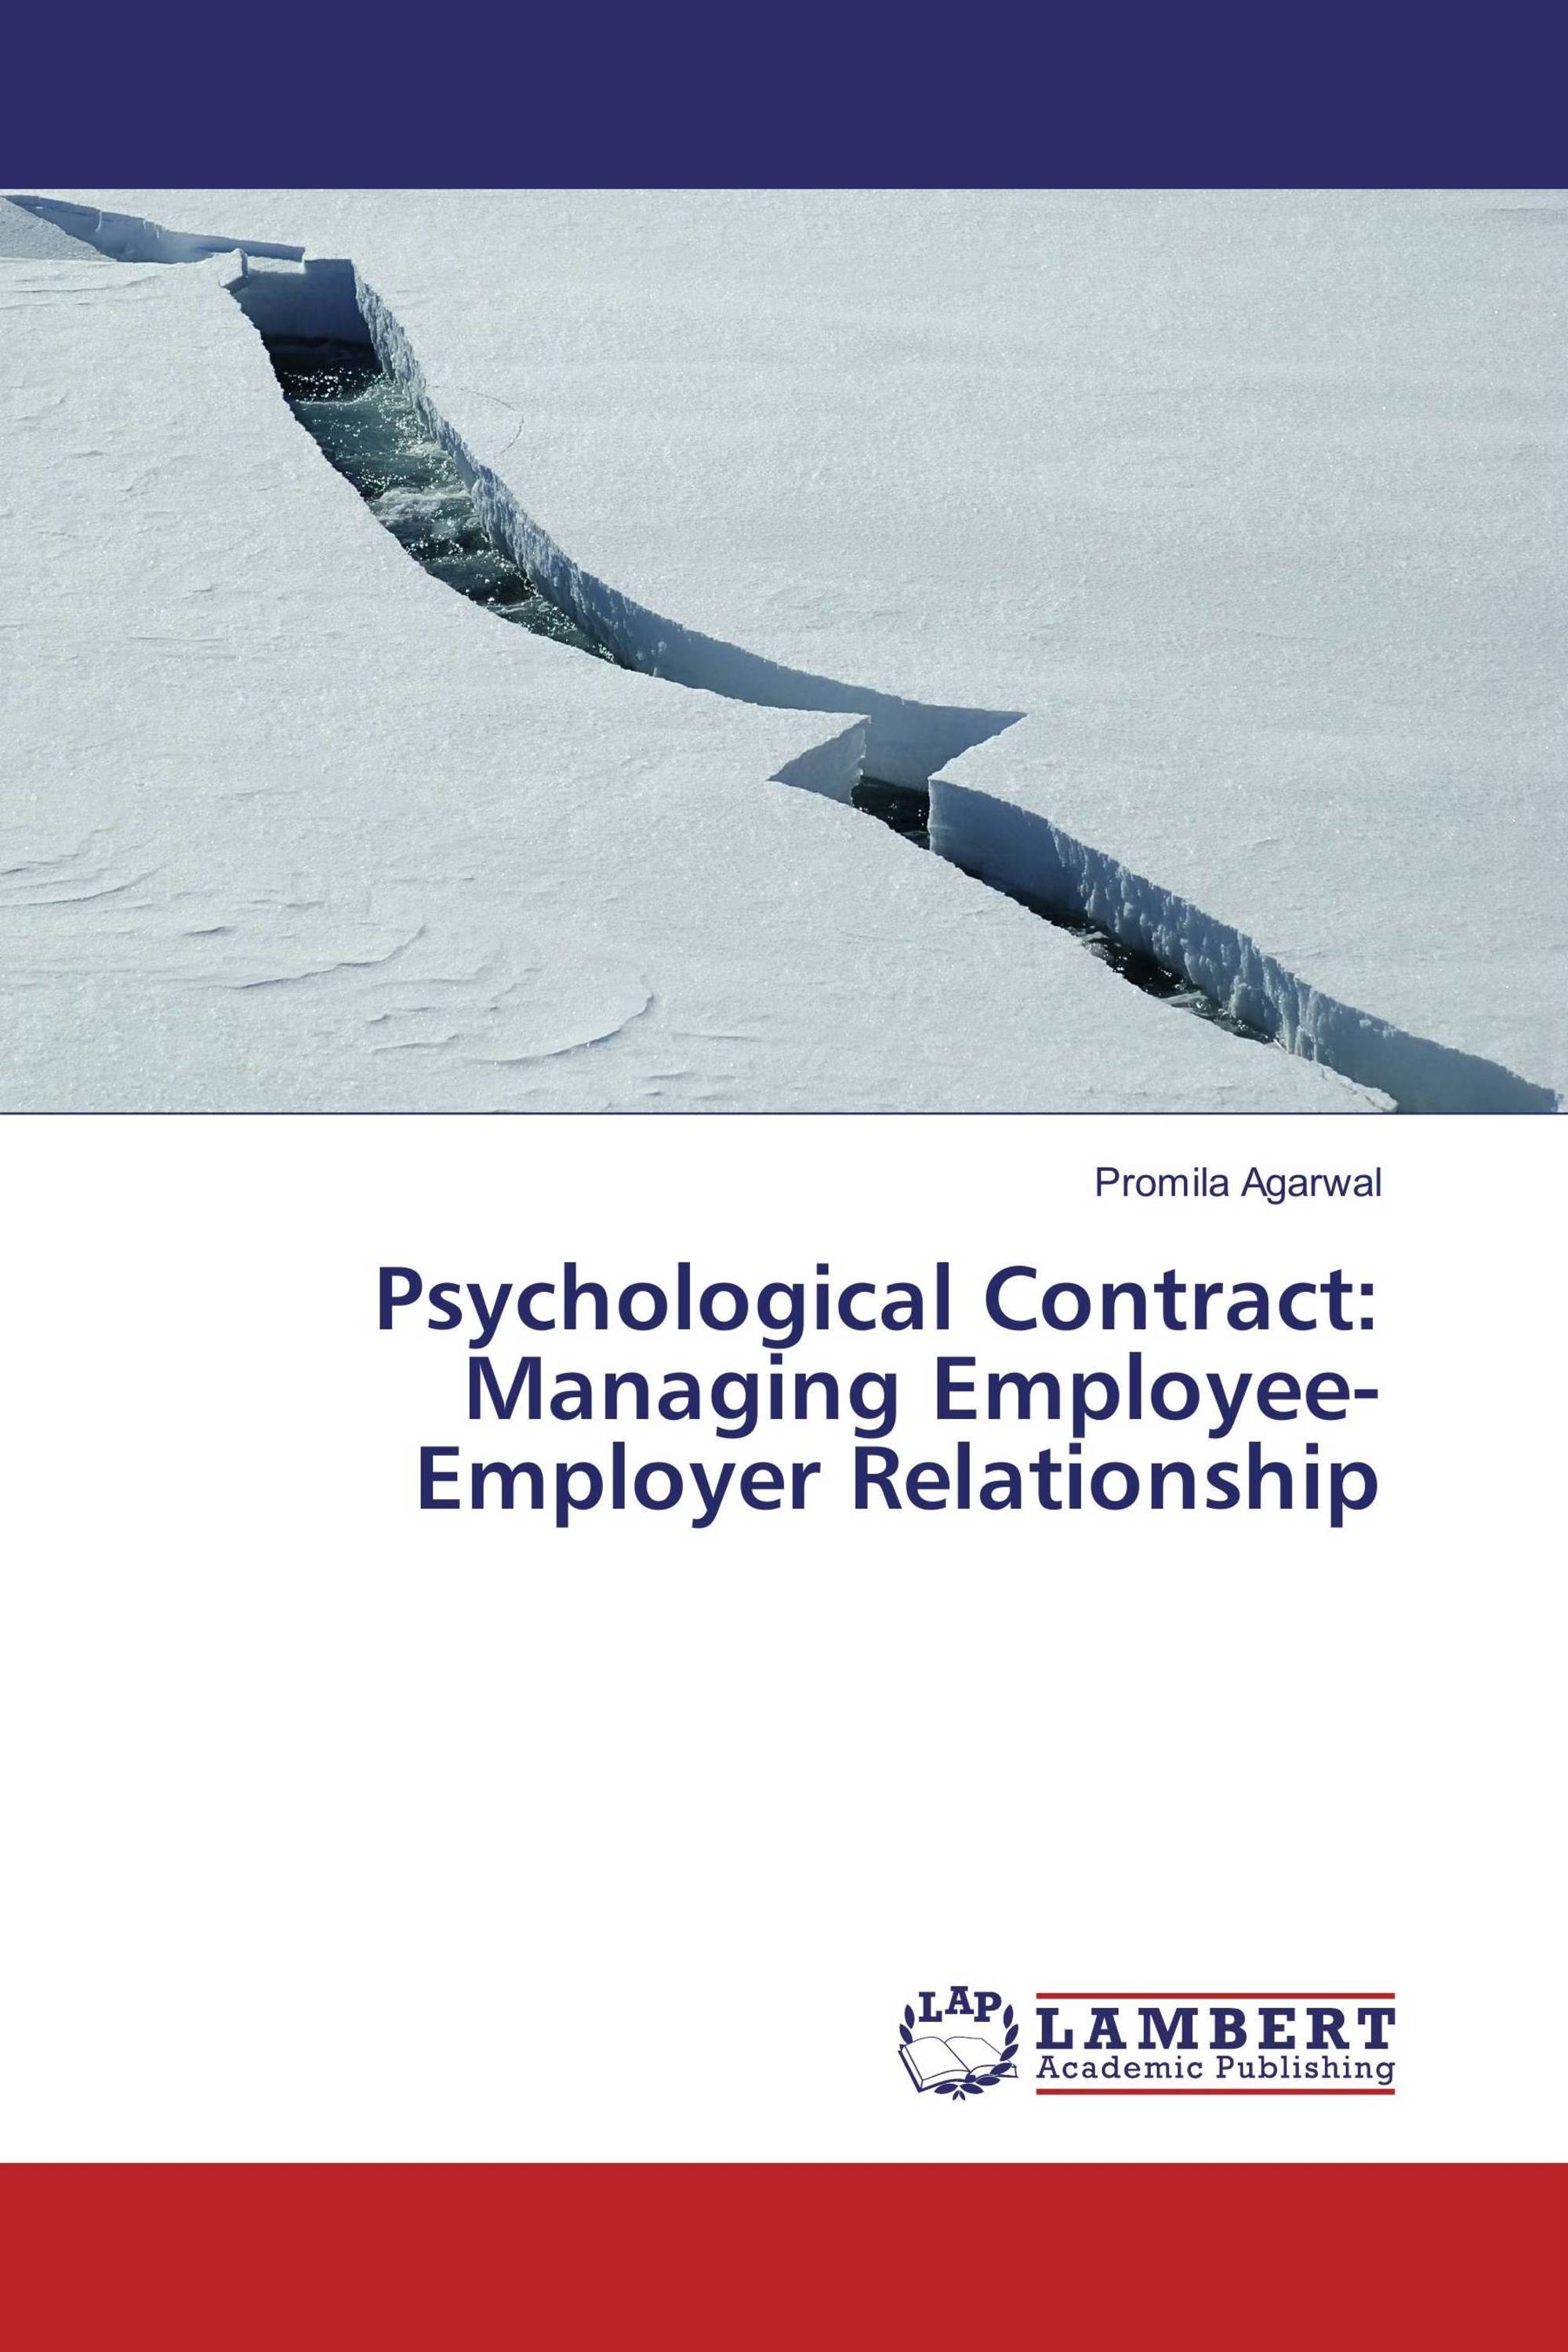 Psychological Contract: Managing Employee-Employer Relationship